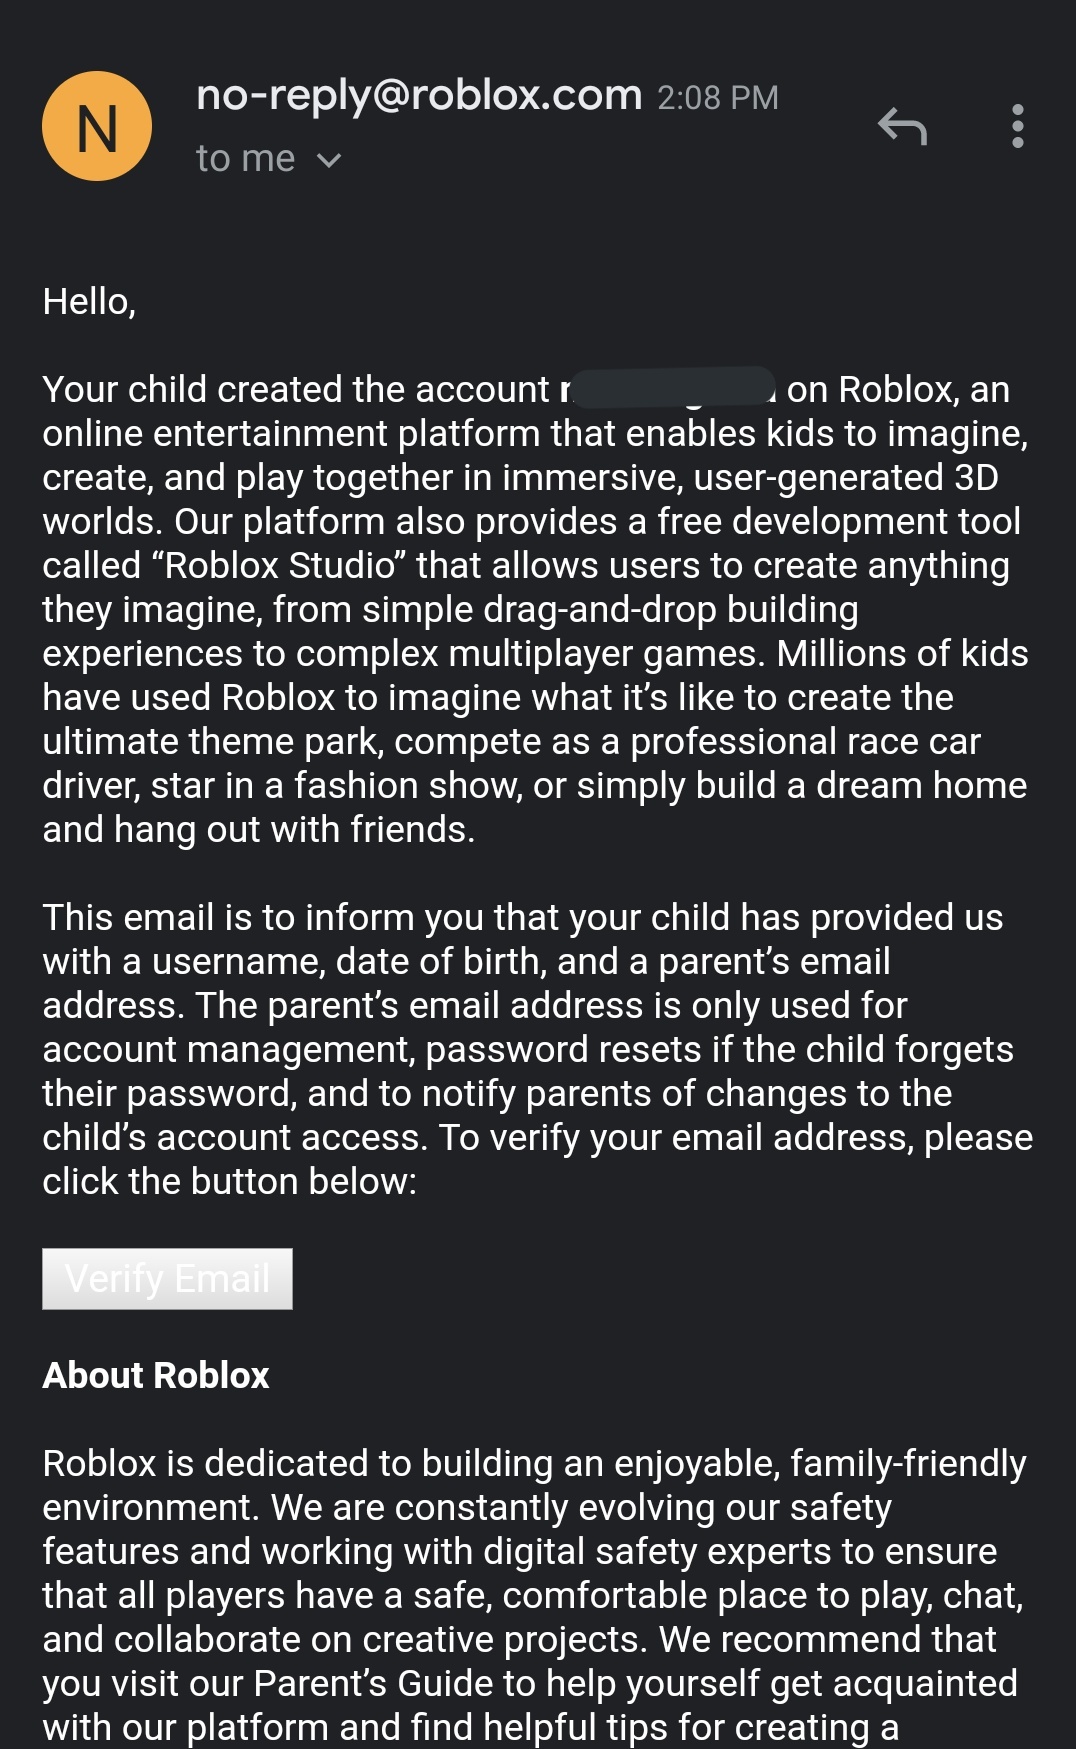 Mikehaze On Twitter I Get This Msg Everyday From Roblox About A Child Who Needs Me To Verify Their Account So They Can Play I Tried To Verify The Email But I - email address for roblox to play